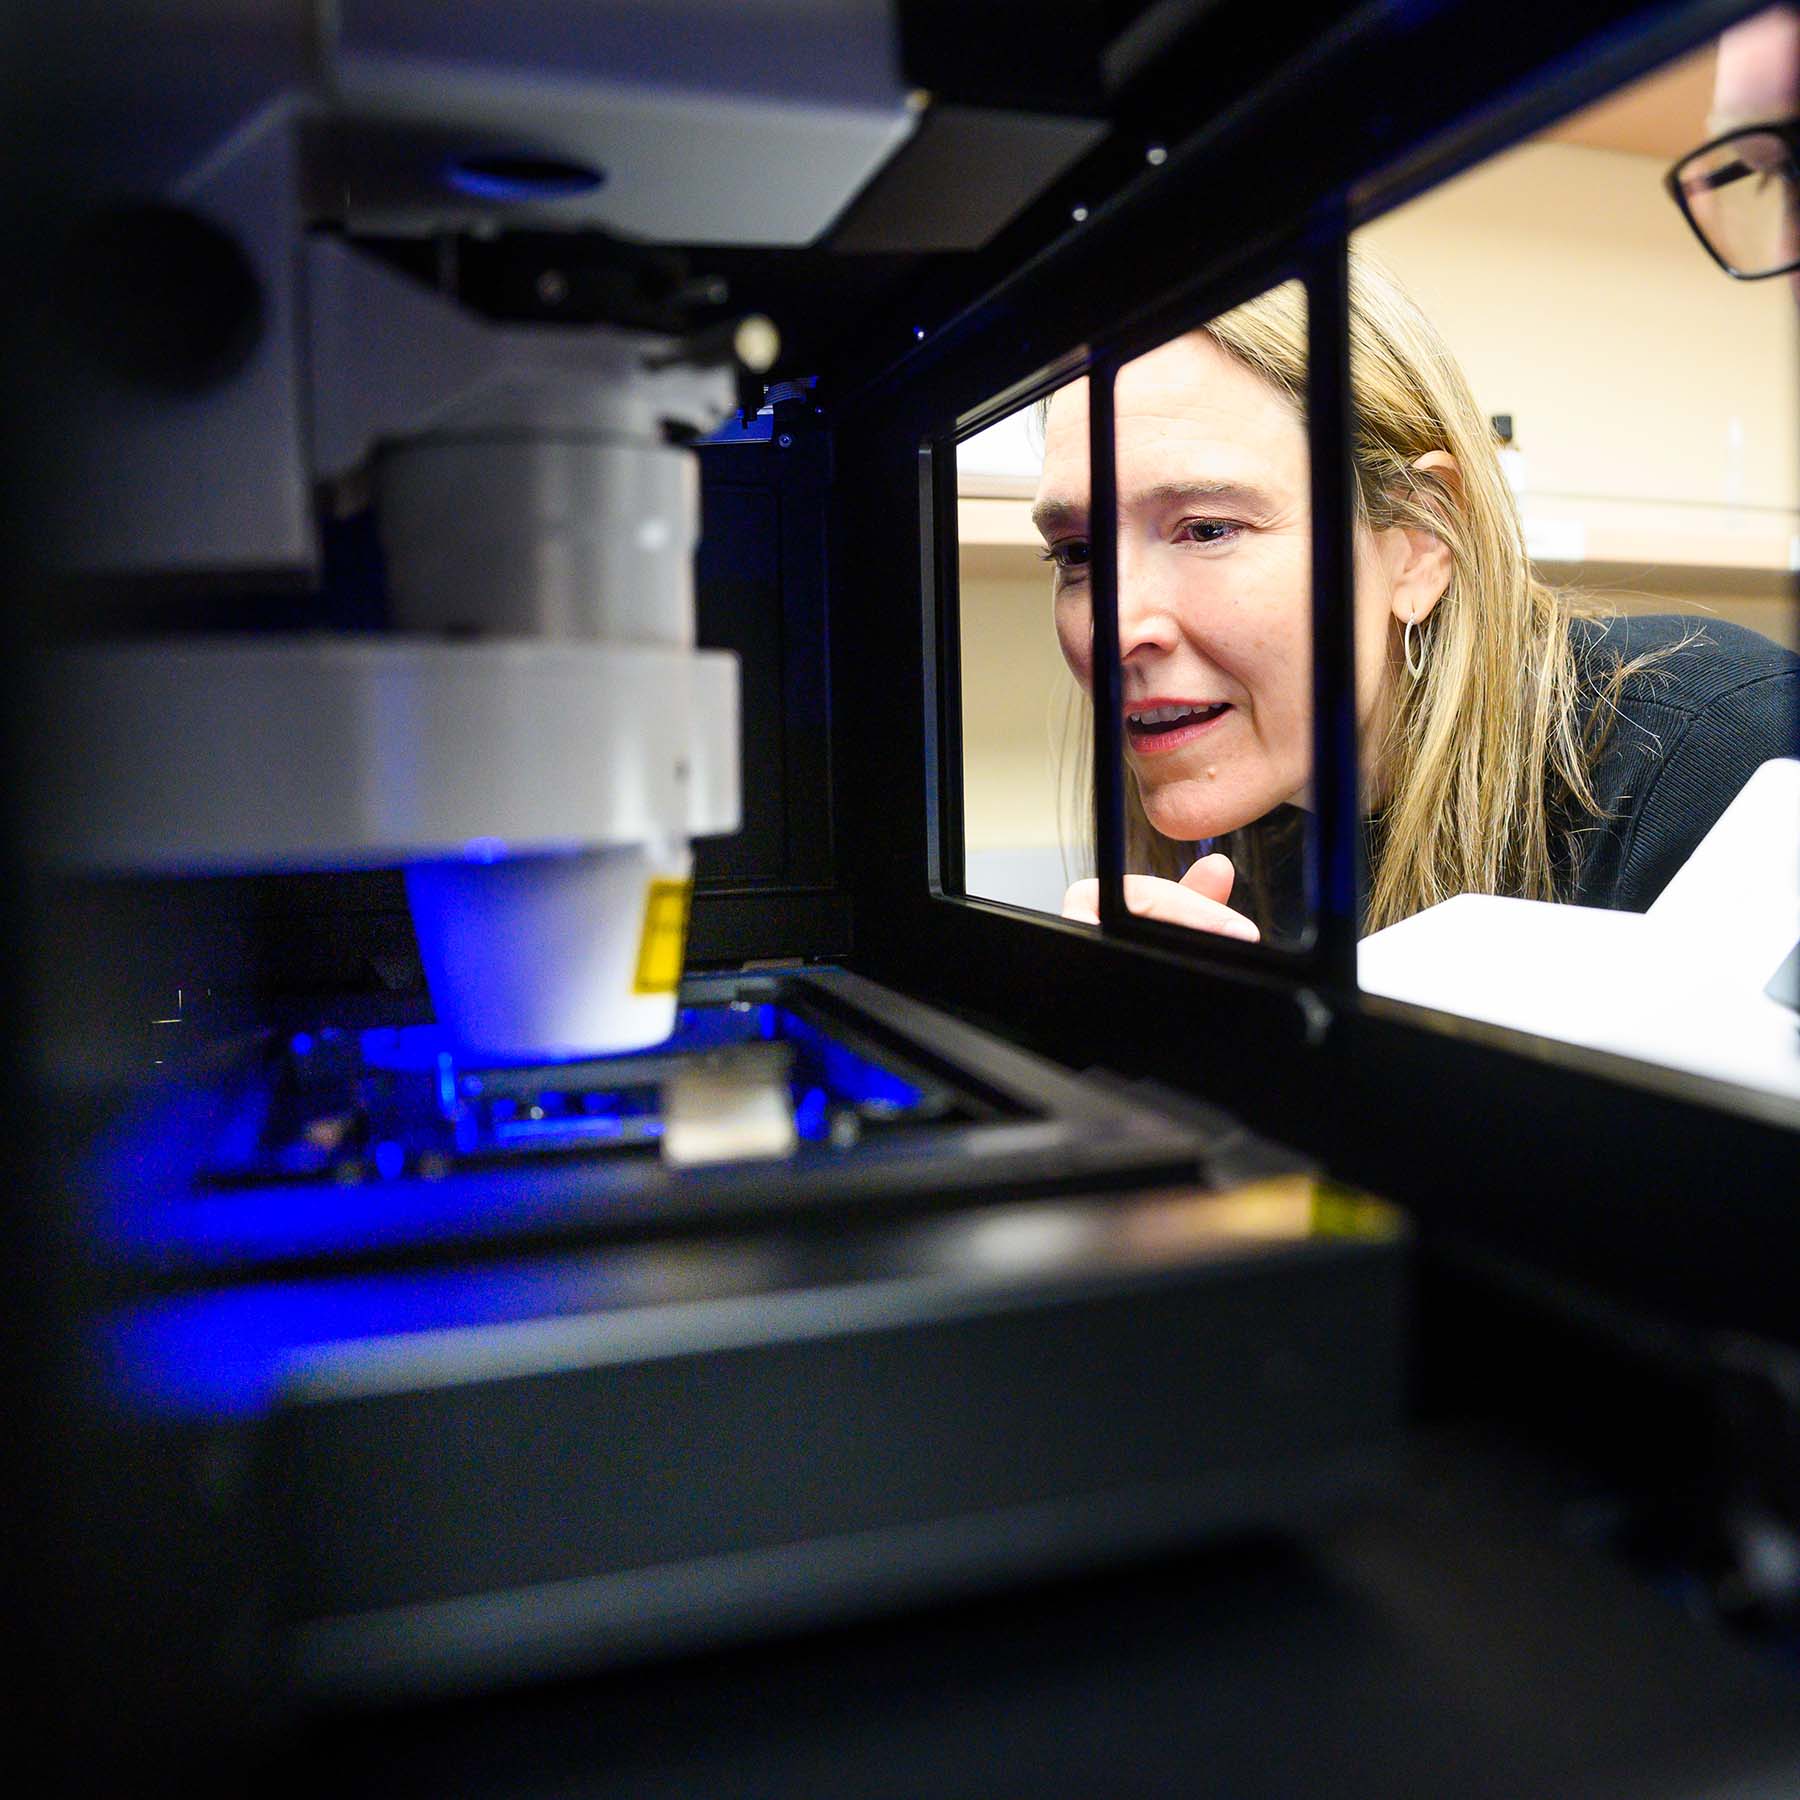 Leanne Jones peers into a chamber that contains a high-powered microscope